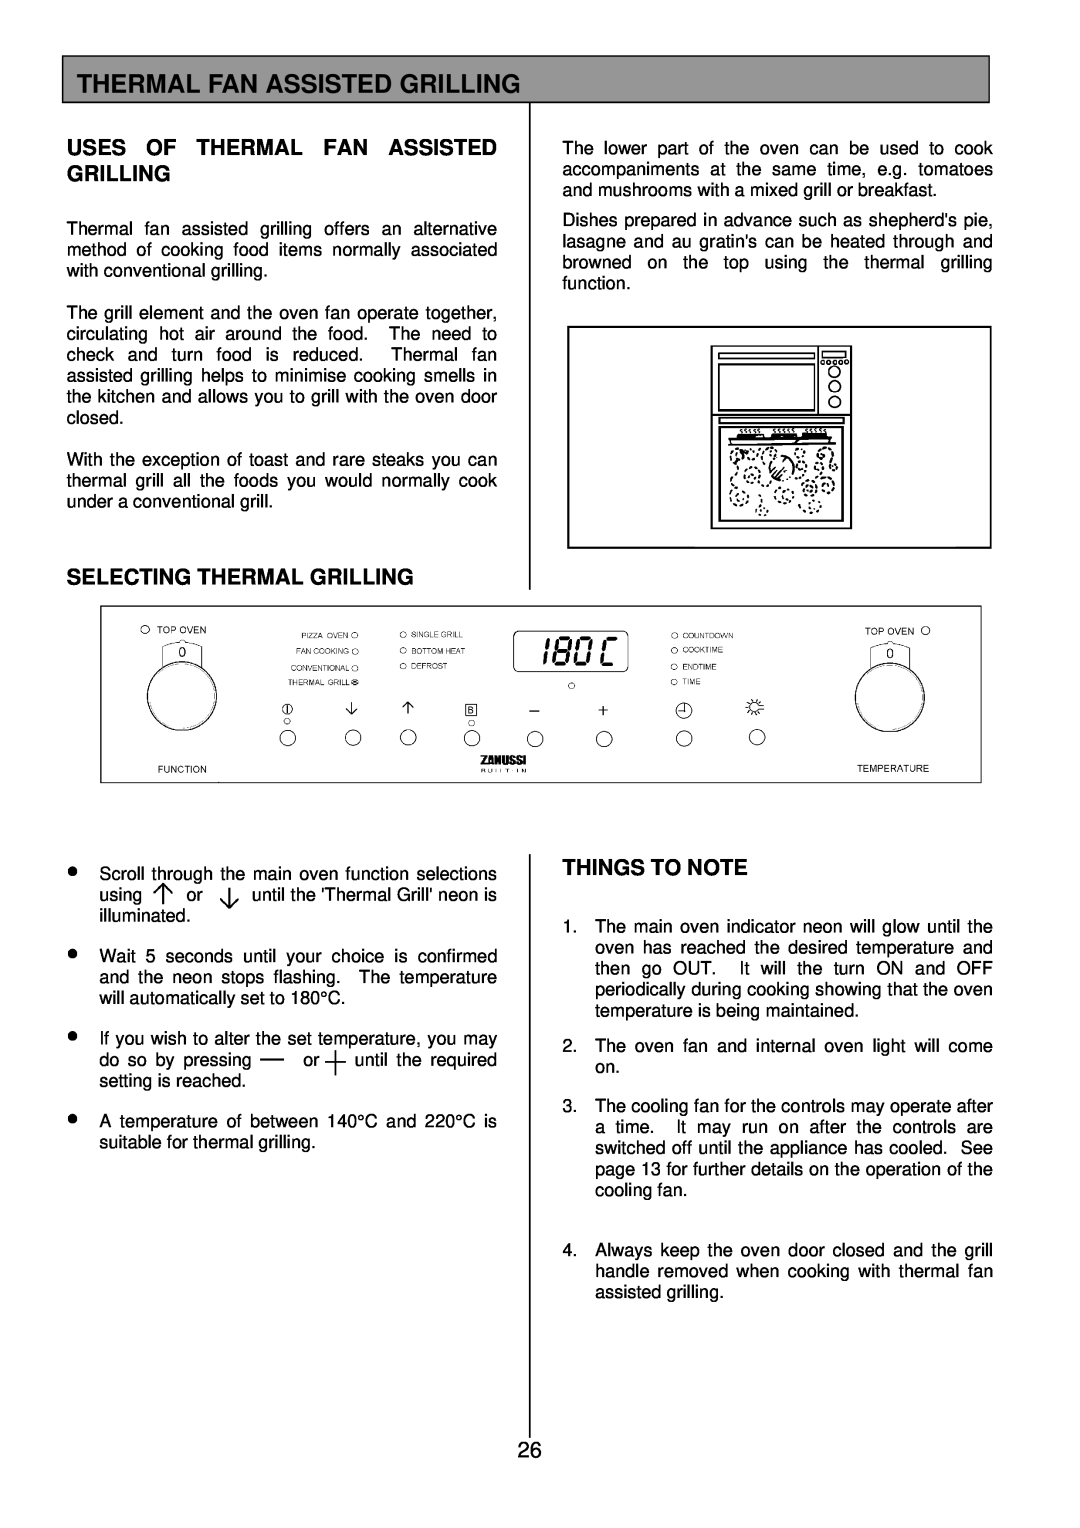 Zanussi ZDQ 895 manual Uses Of Thermal Fan Assisted Grilling, Selecting Thermal Grilling, Things To Note 